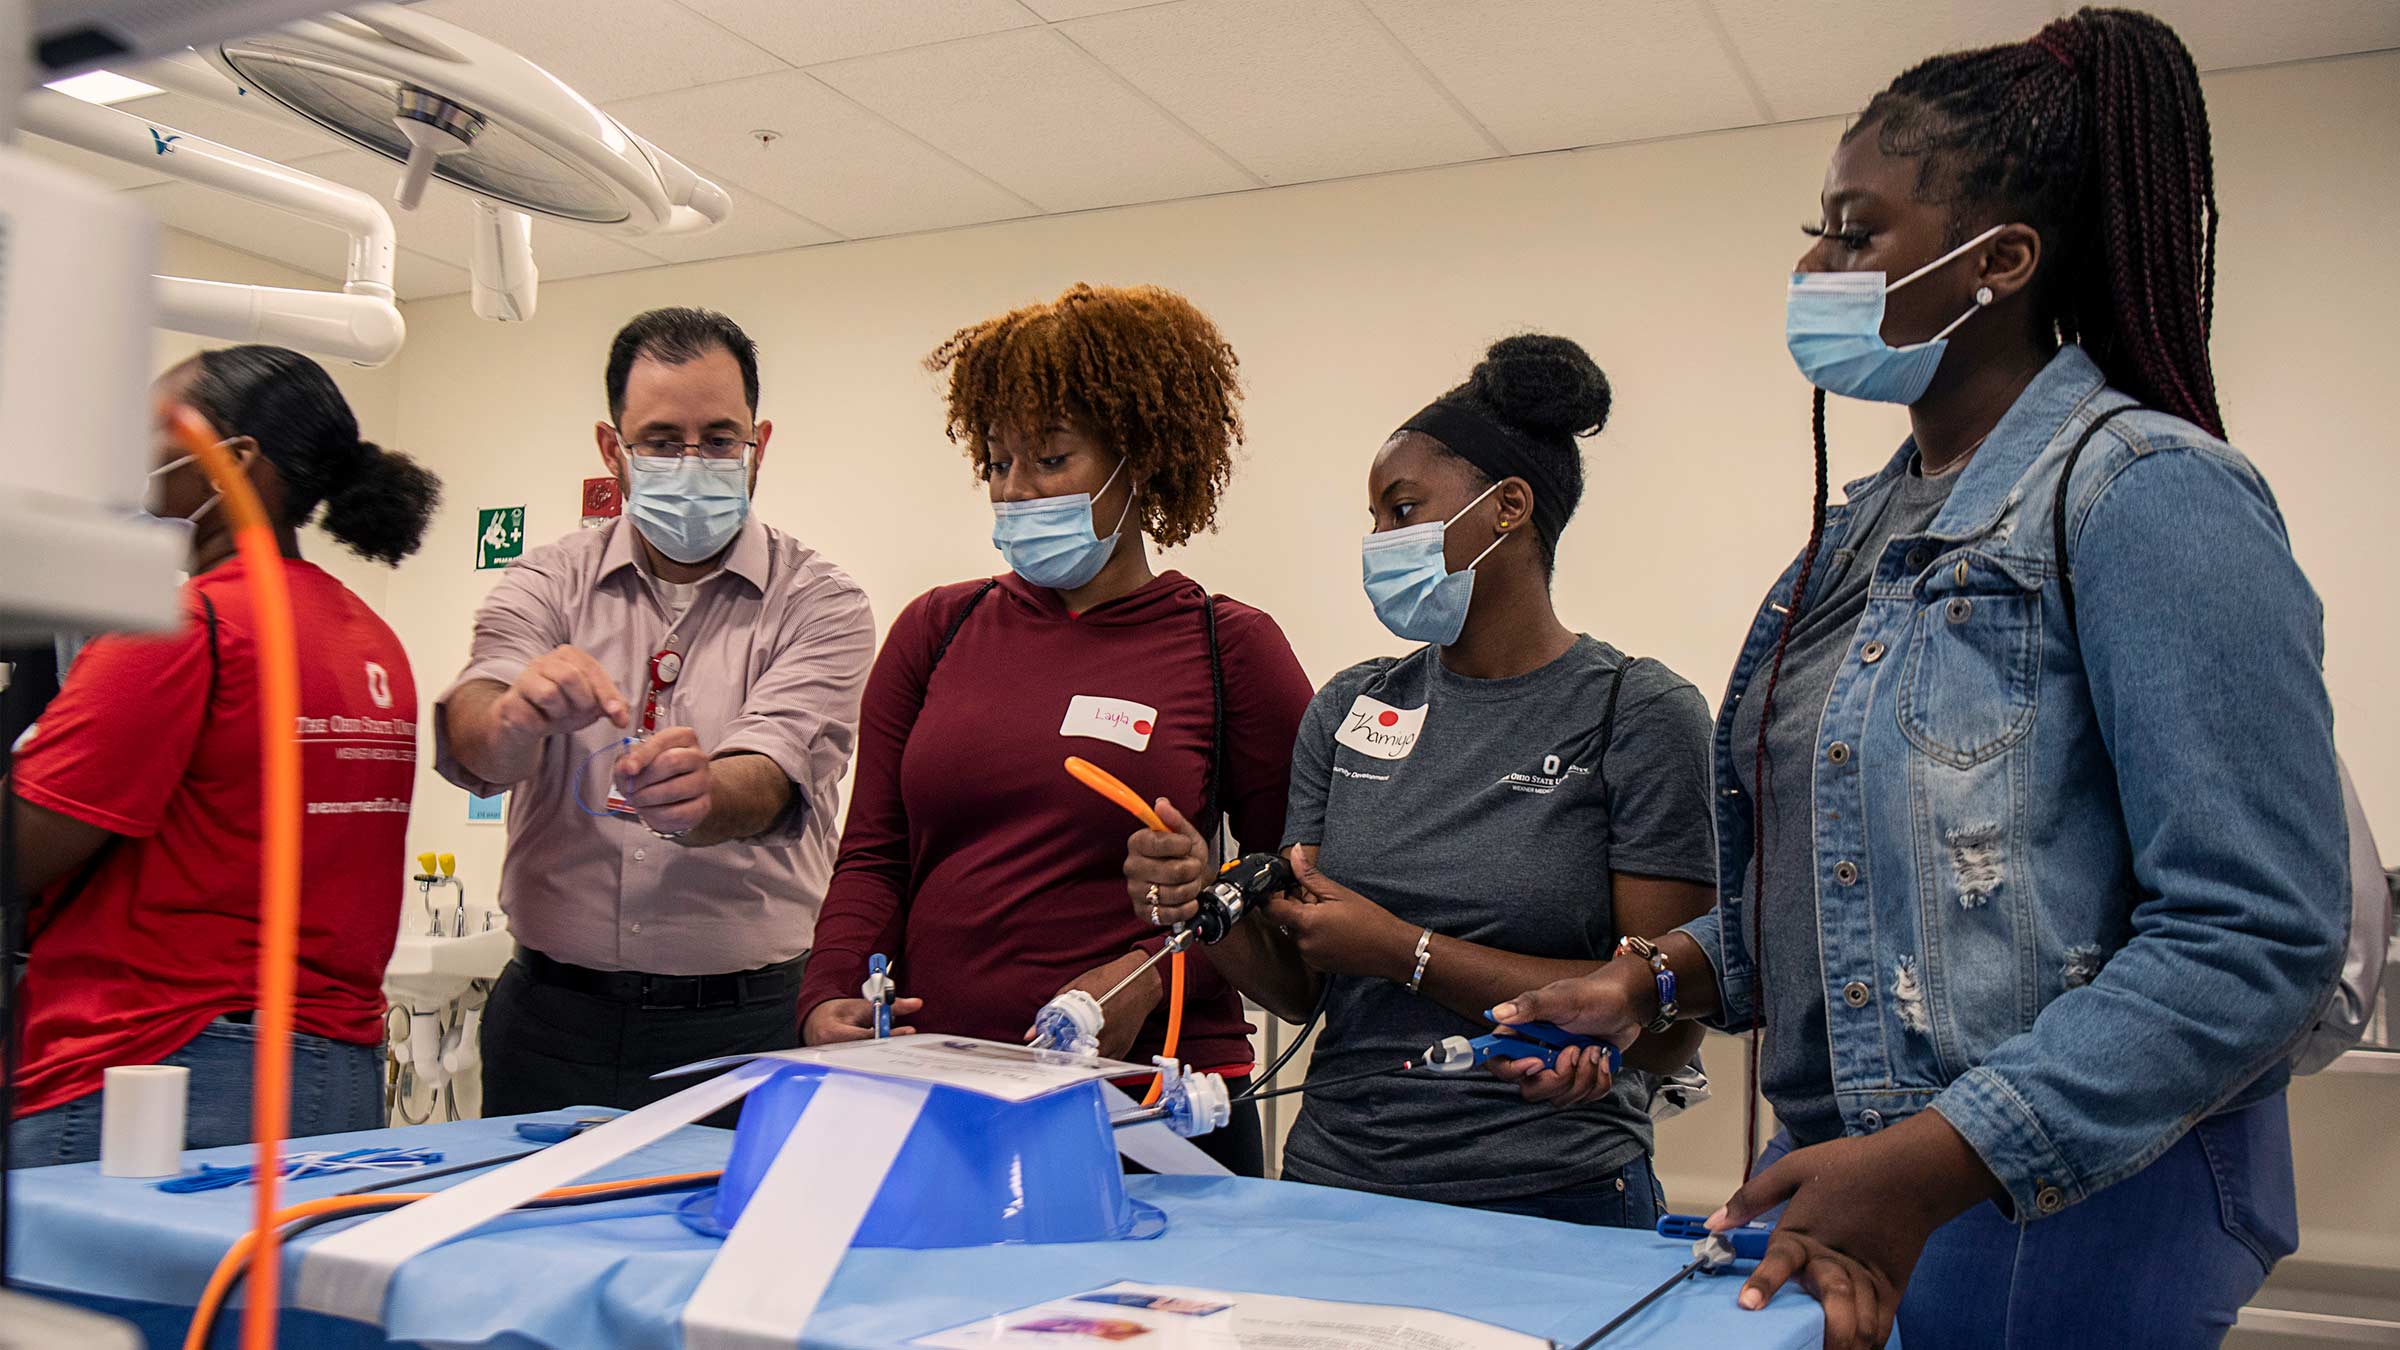 Frank Piscitani, associate director of Ohio State's Surgical Skills Lab, leads a simulation on laparoscopic surgery to a group of high school students